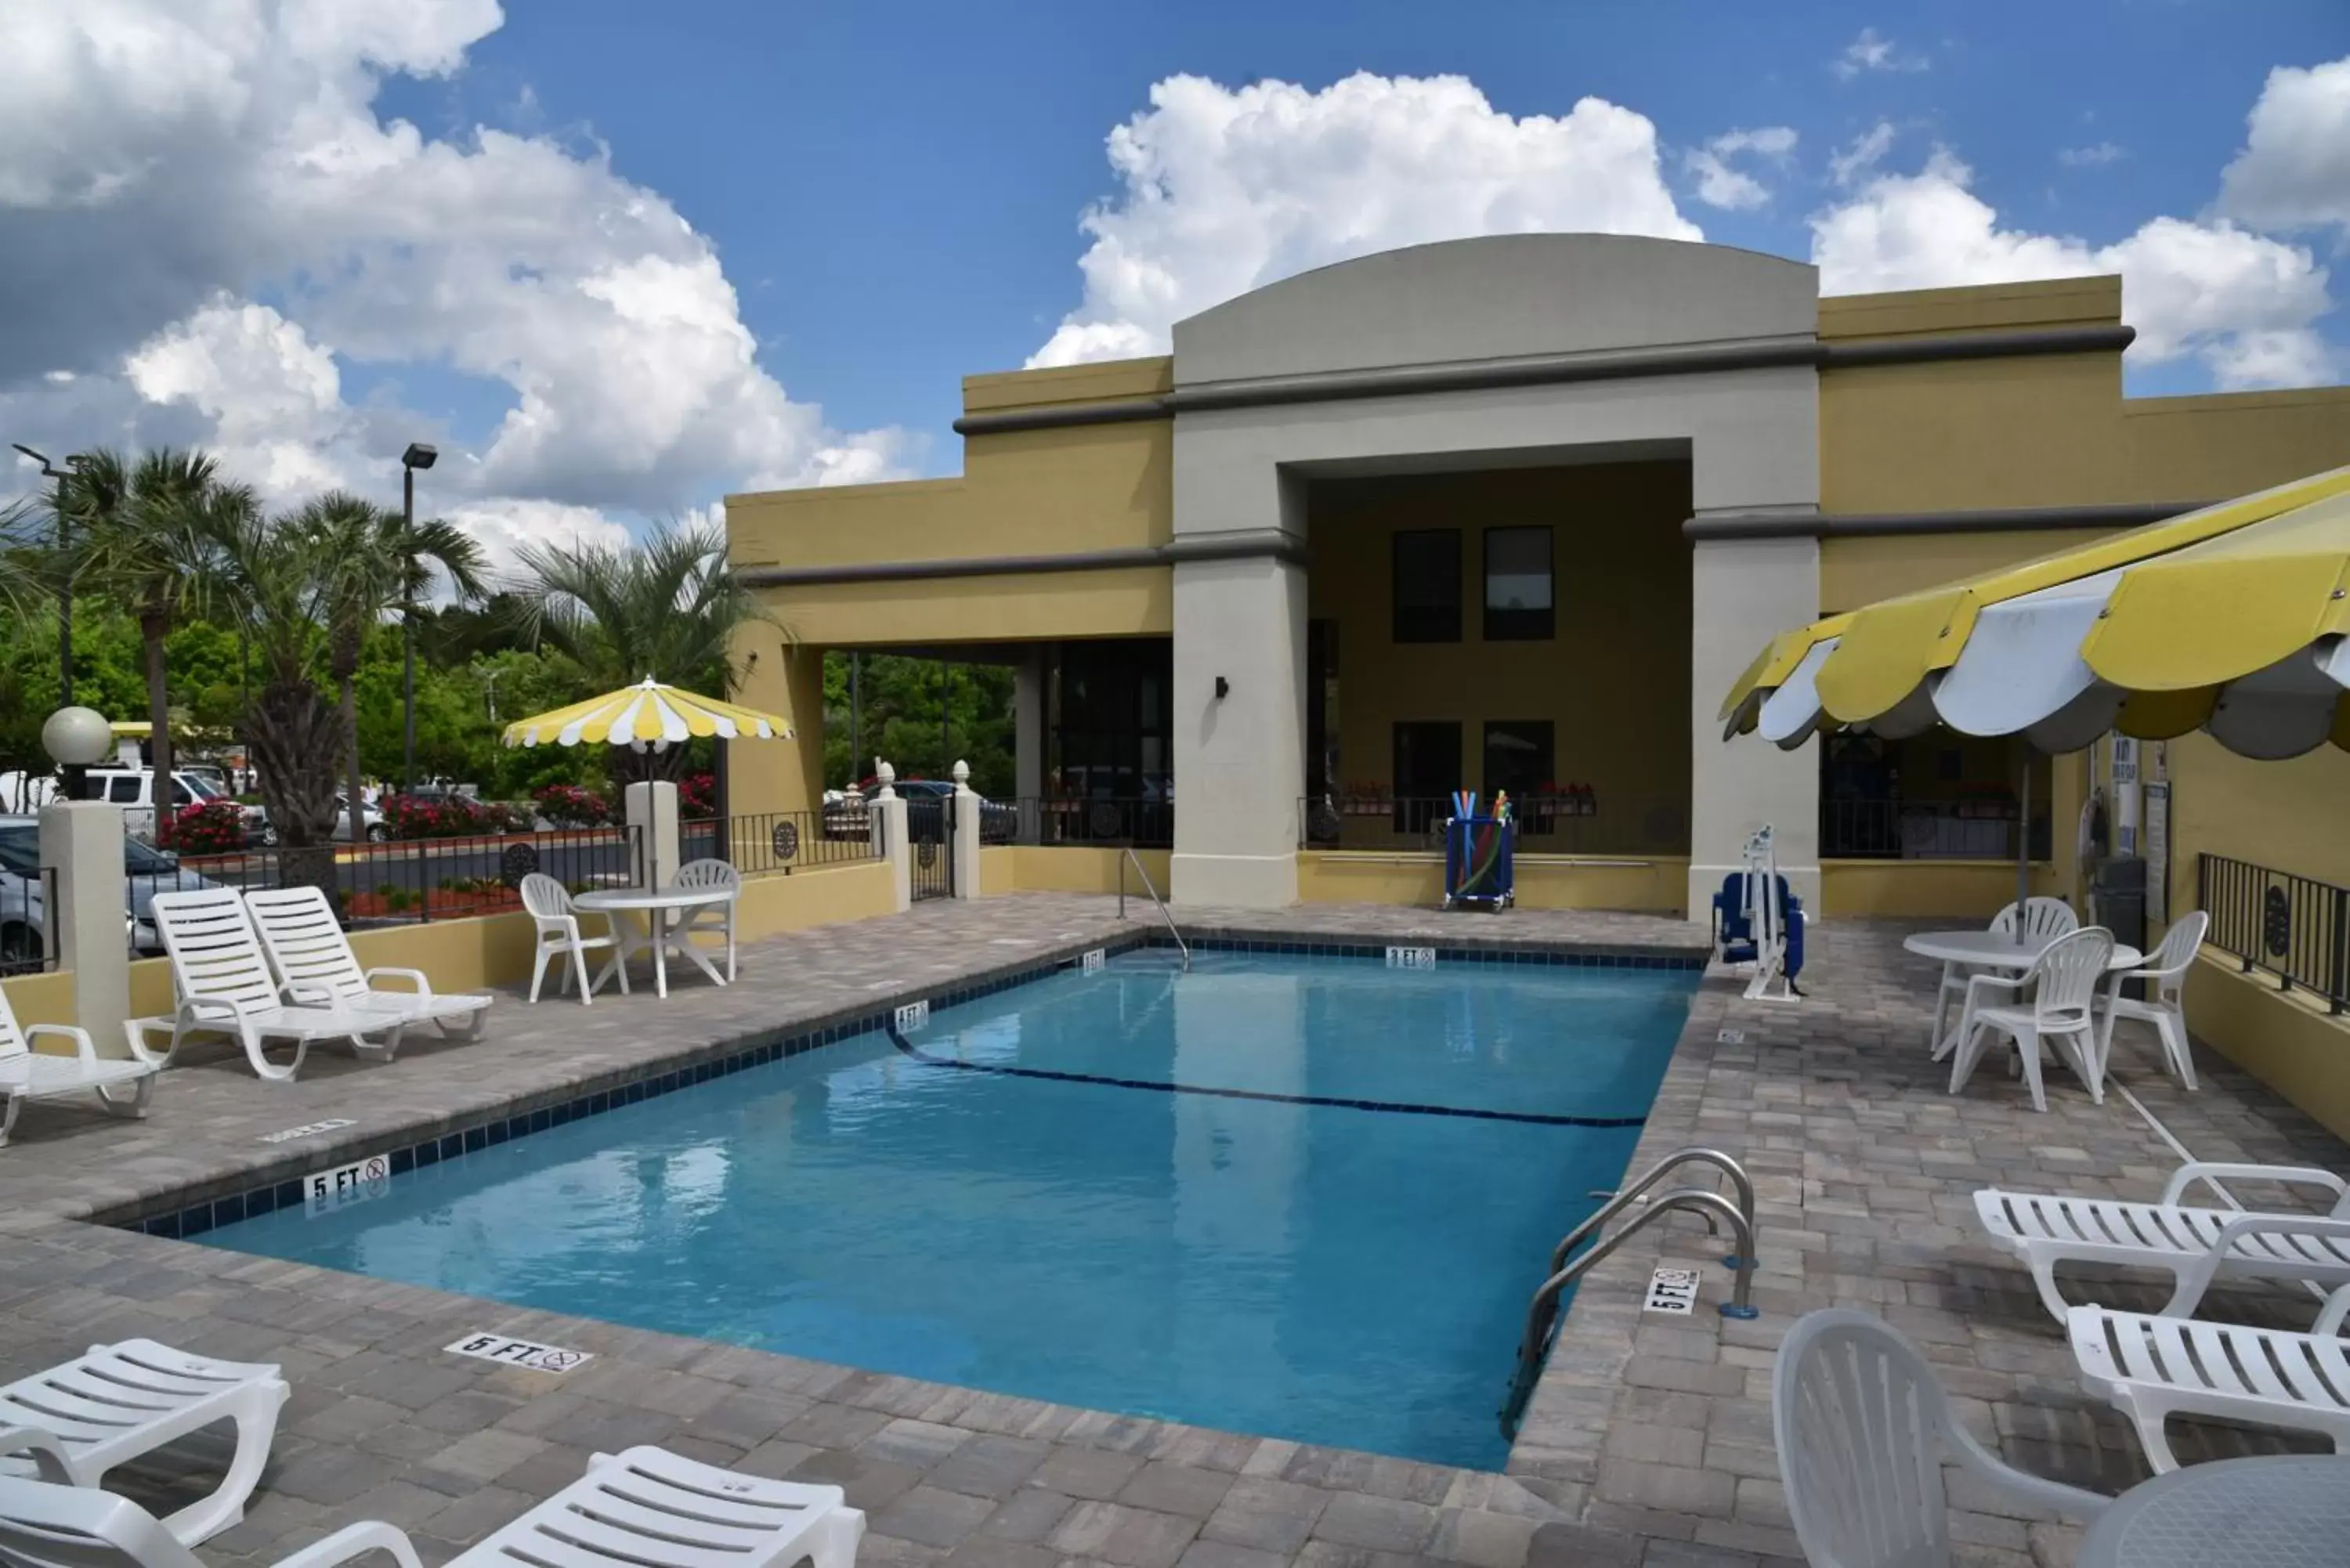 Property building, Swimming Pool in Days Inn by Wyndham Ladson Summerville Charleston